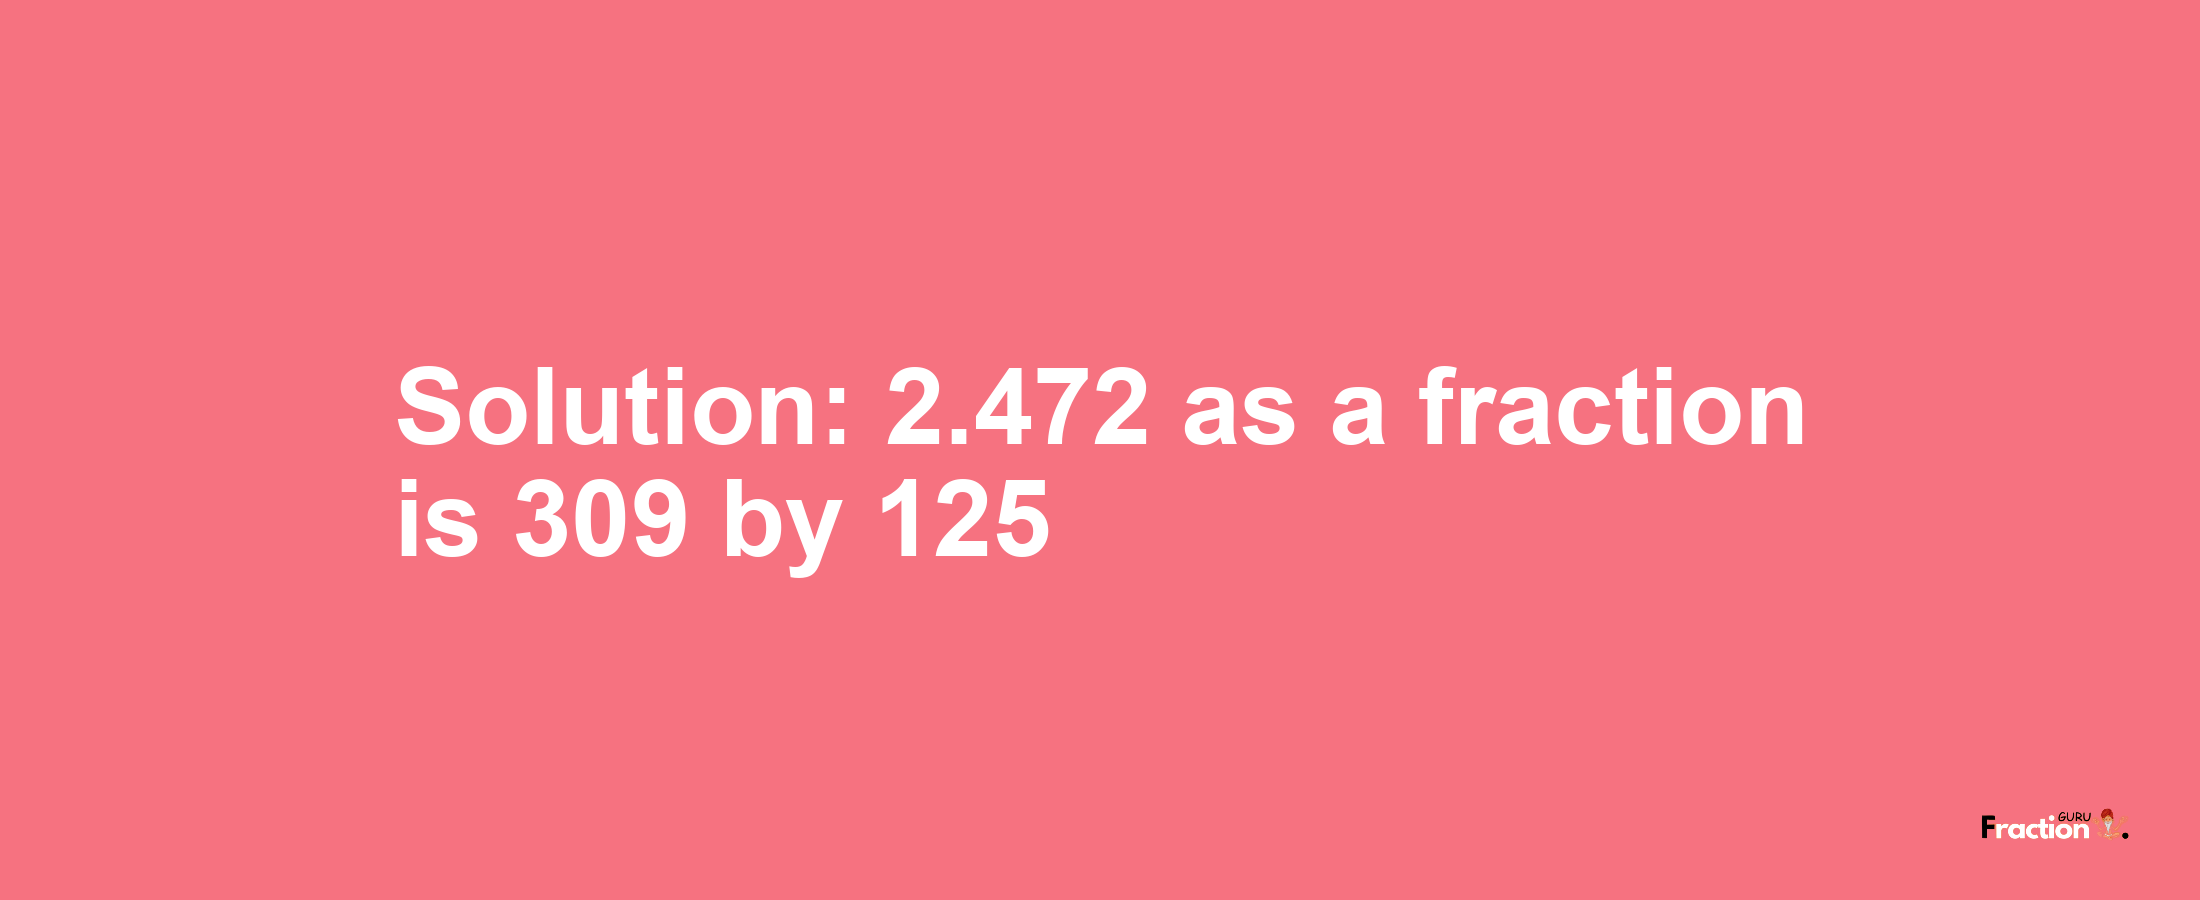 Solution:2.472 as a fraction is 309/125